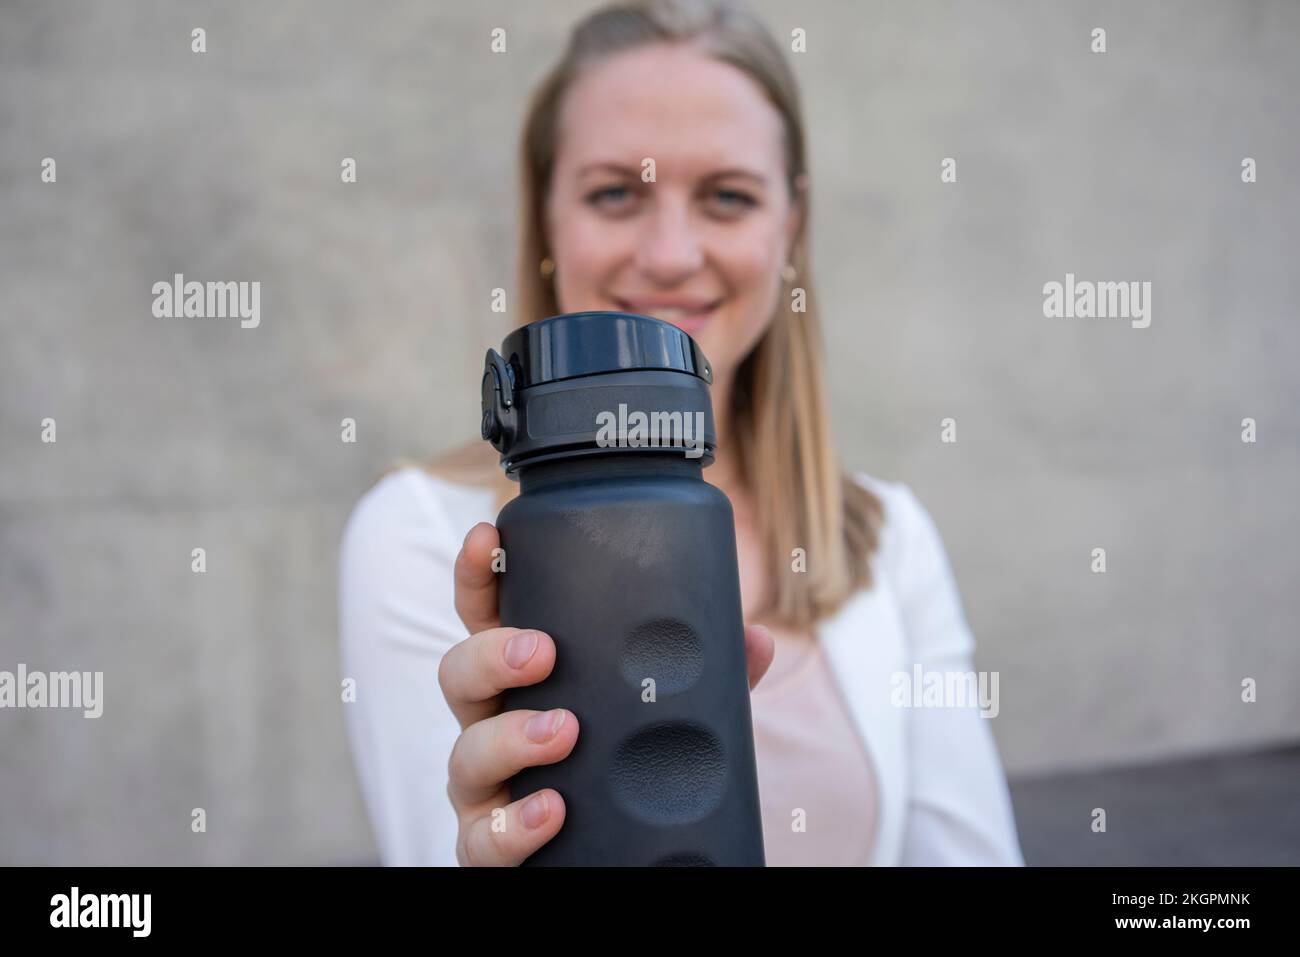 Young swoman showing reusable water bottle Stock Photo